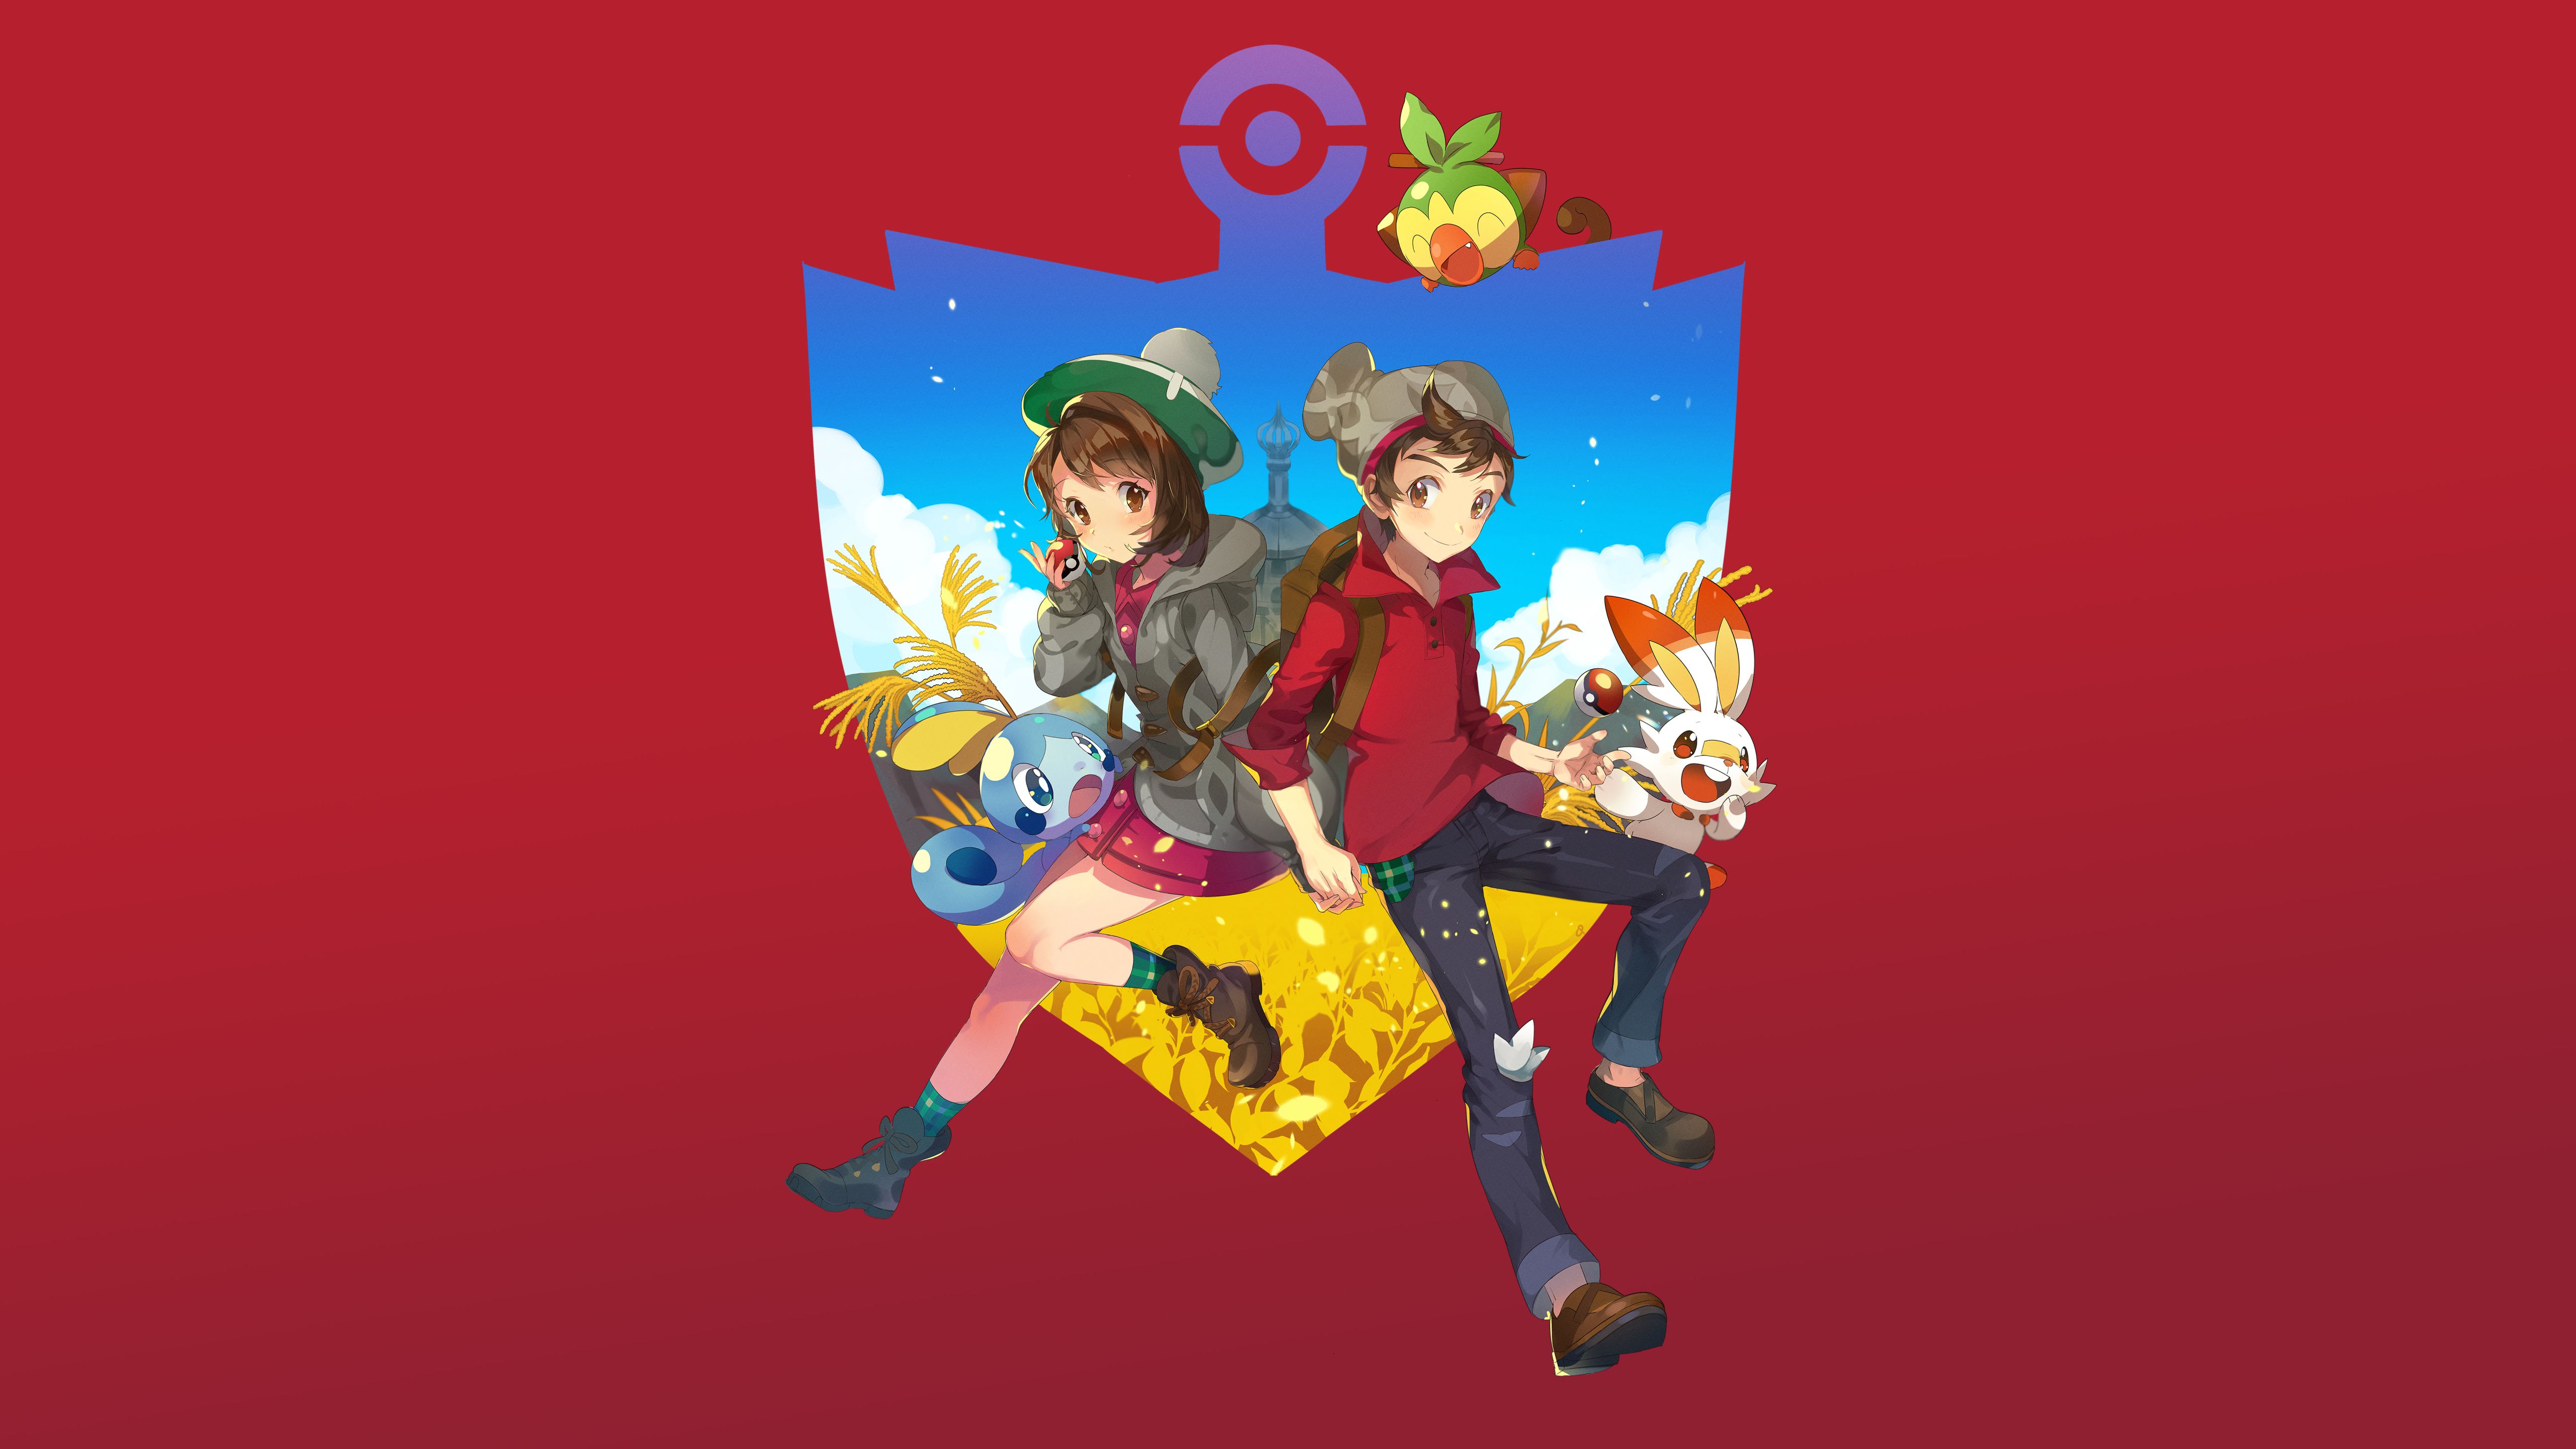 Pokemon Sword and Shield Characters 5K Wallpaper, HD Games 4K Wallpaper, Image, Photo and Background